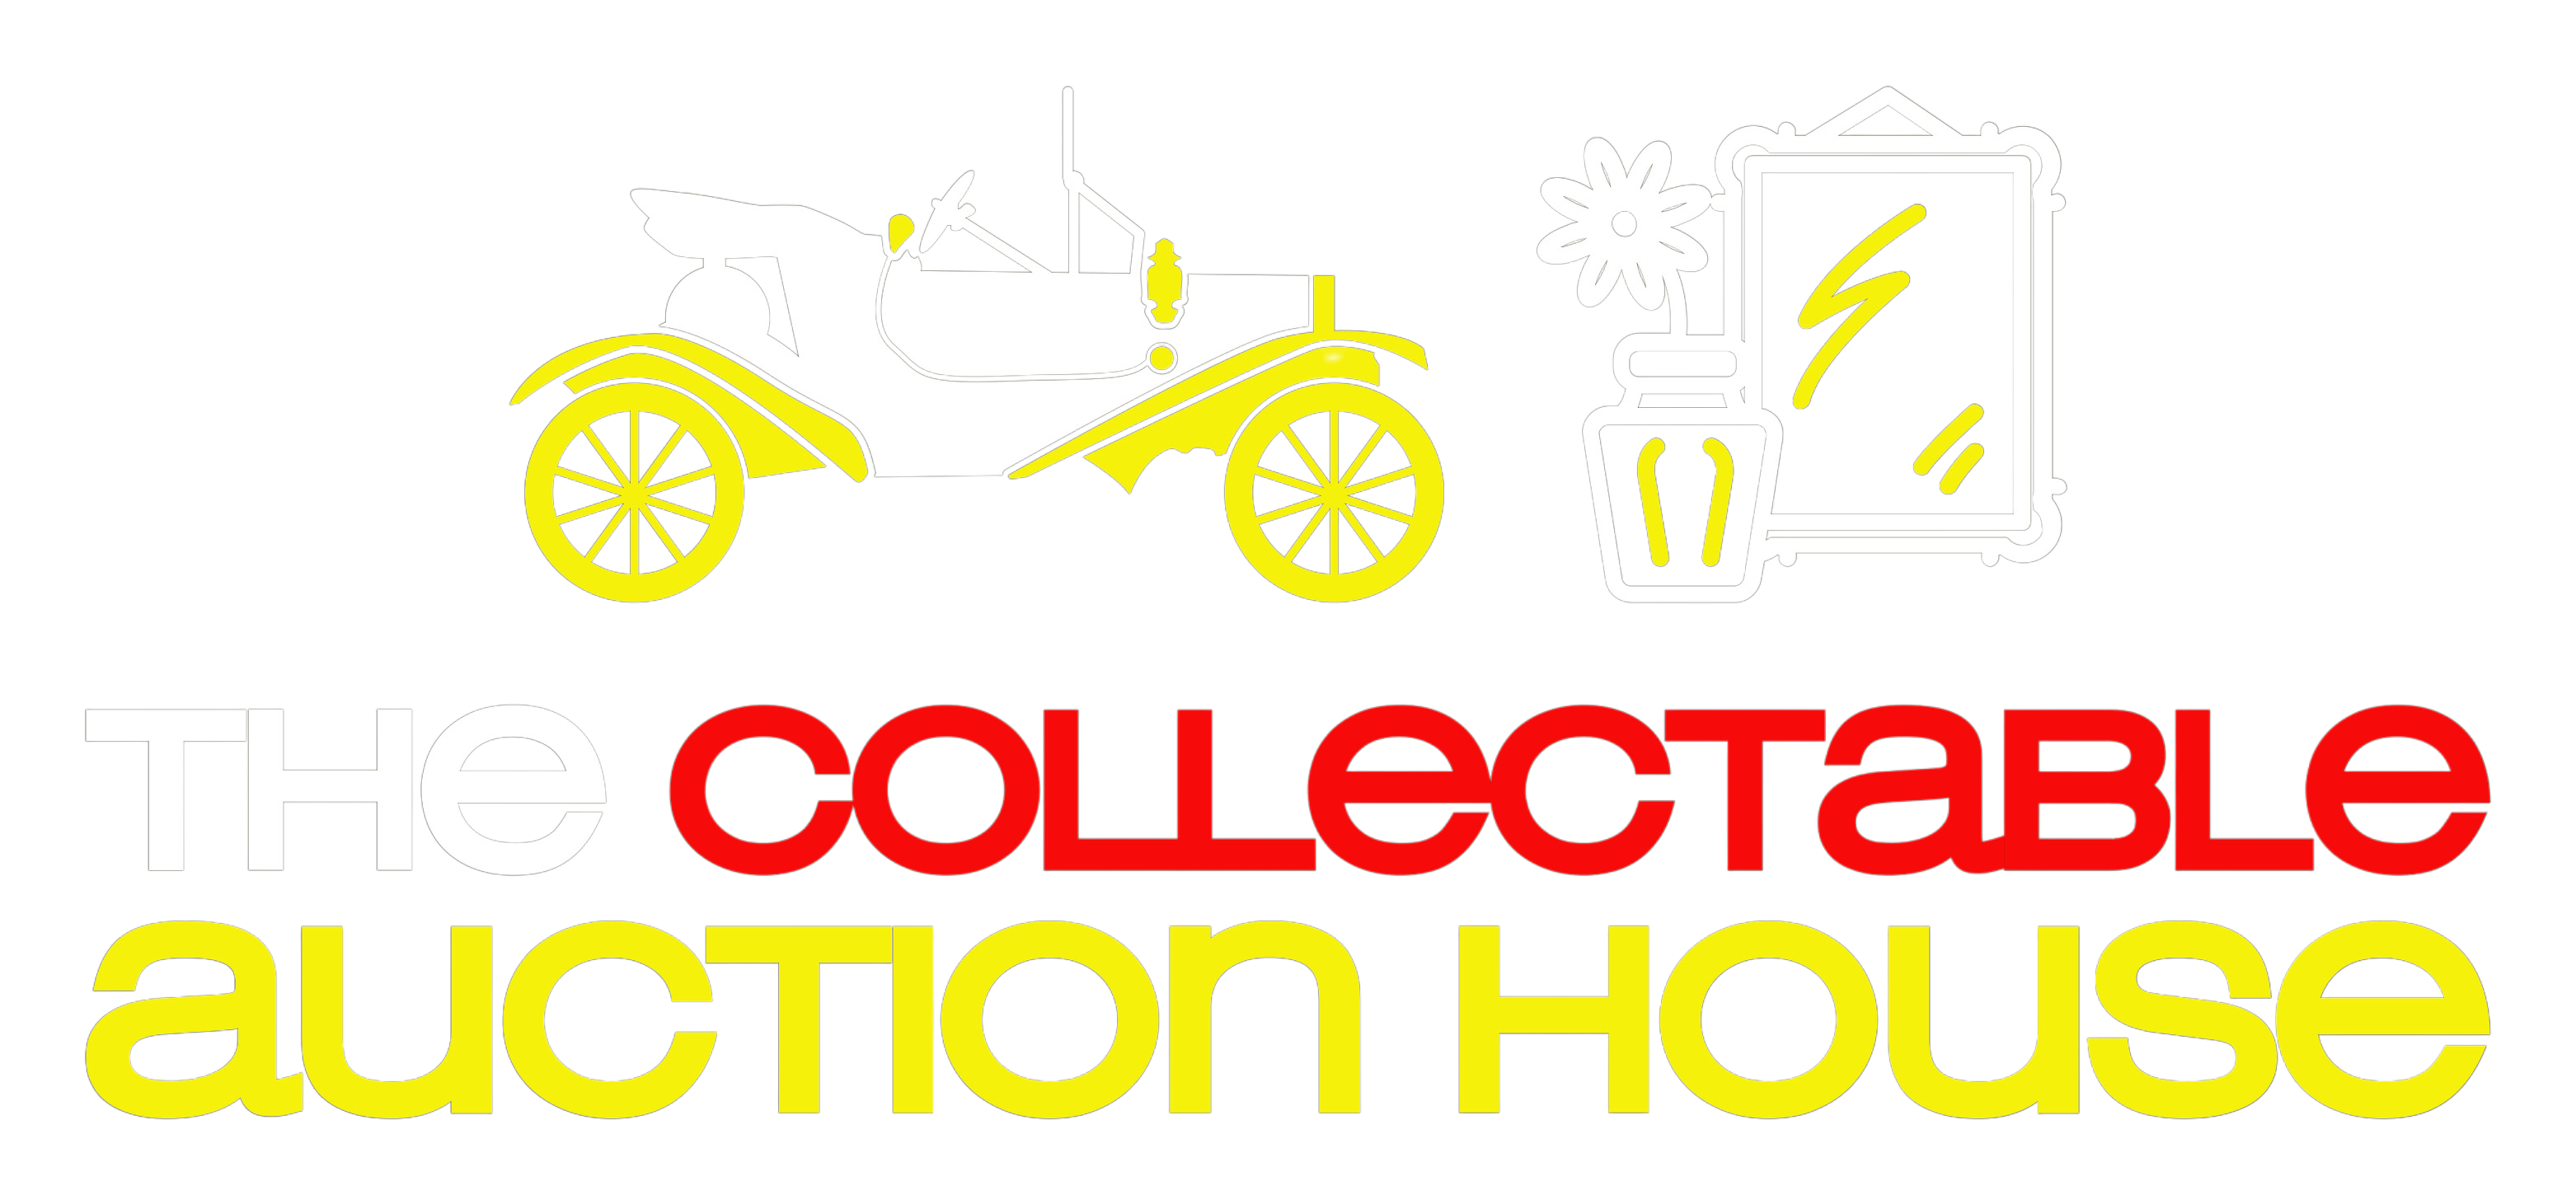 The collectable auction house